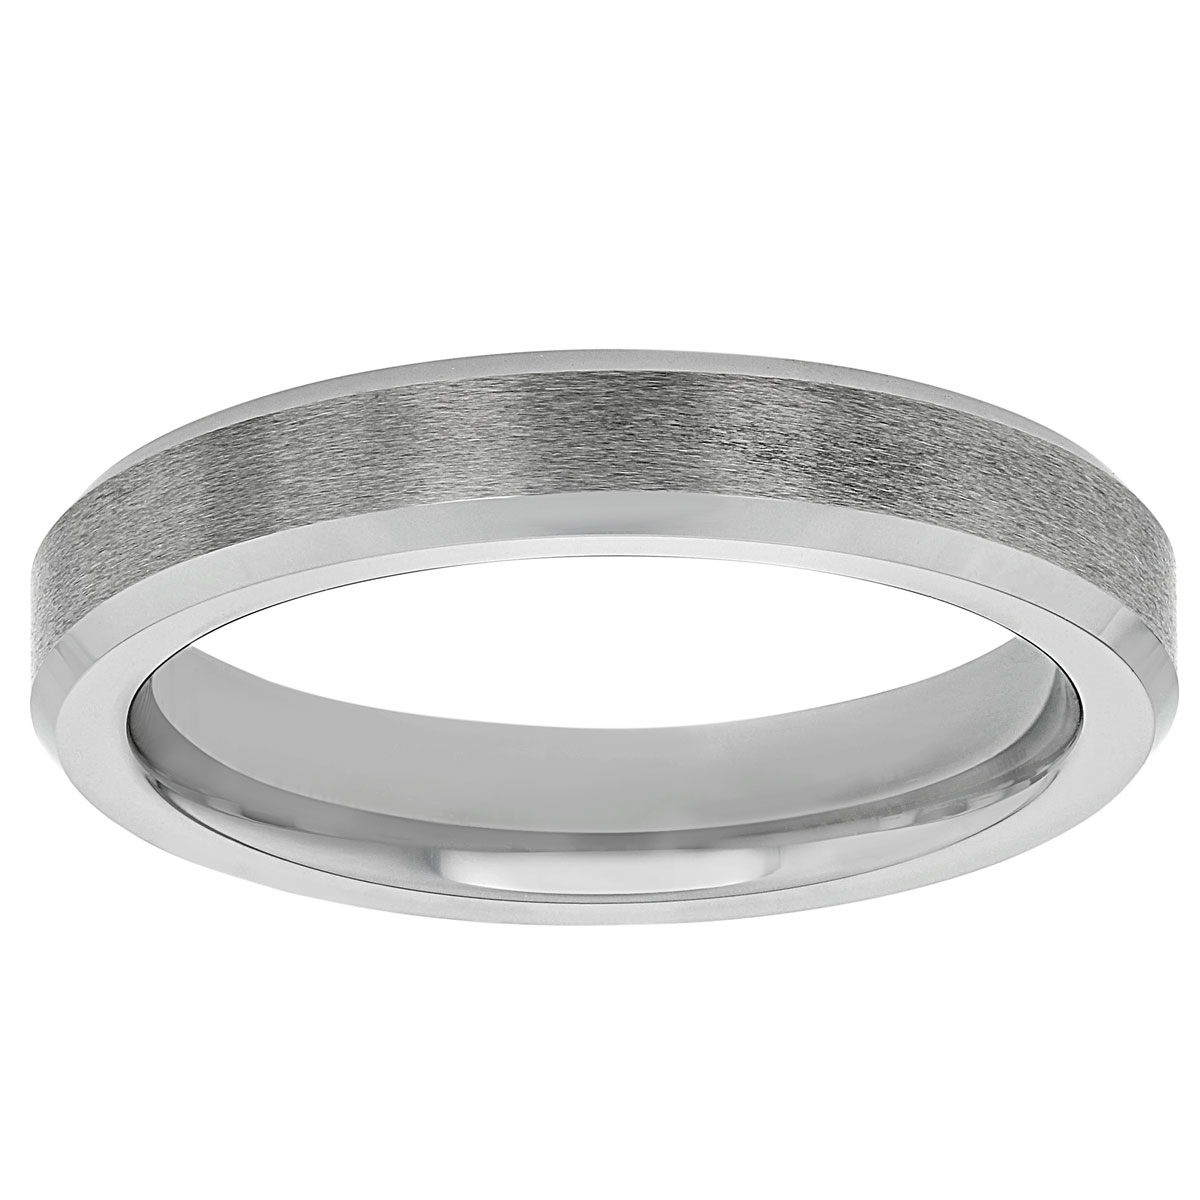 Tungsten Comfort Fit 4 mm Satin Wedding Band with Beveled Edge, Size 9 ...